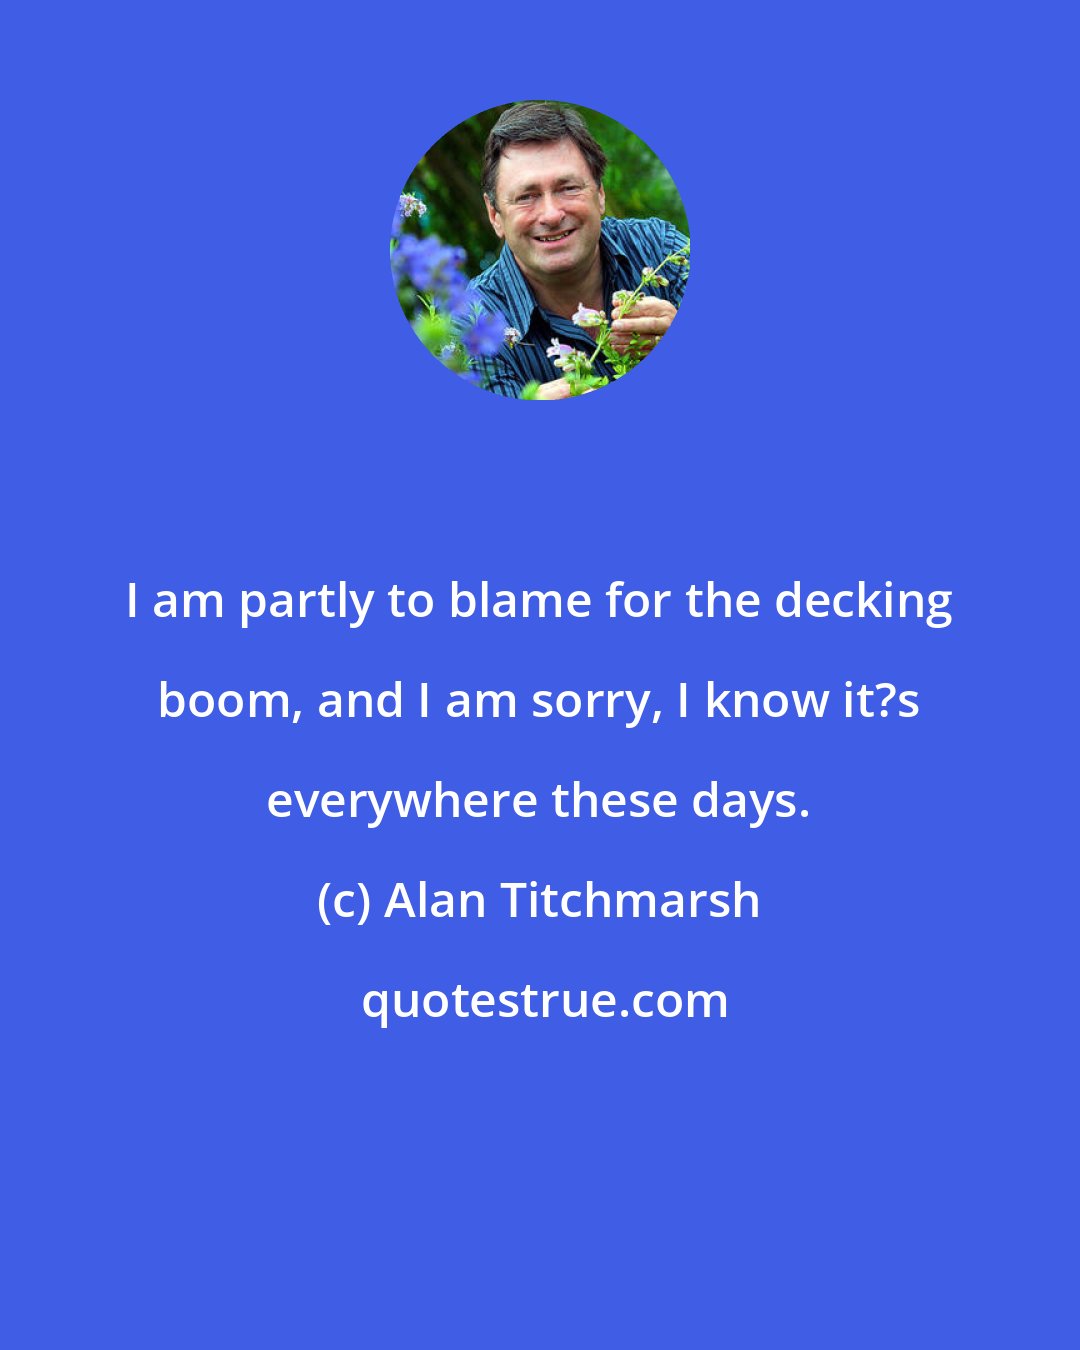 Alan Titchmarsh: I am partly to blame for the decking boom, and I am sorry, I know it?s everywhere these days.